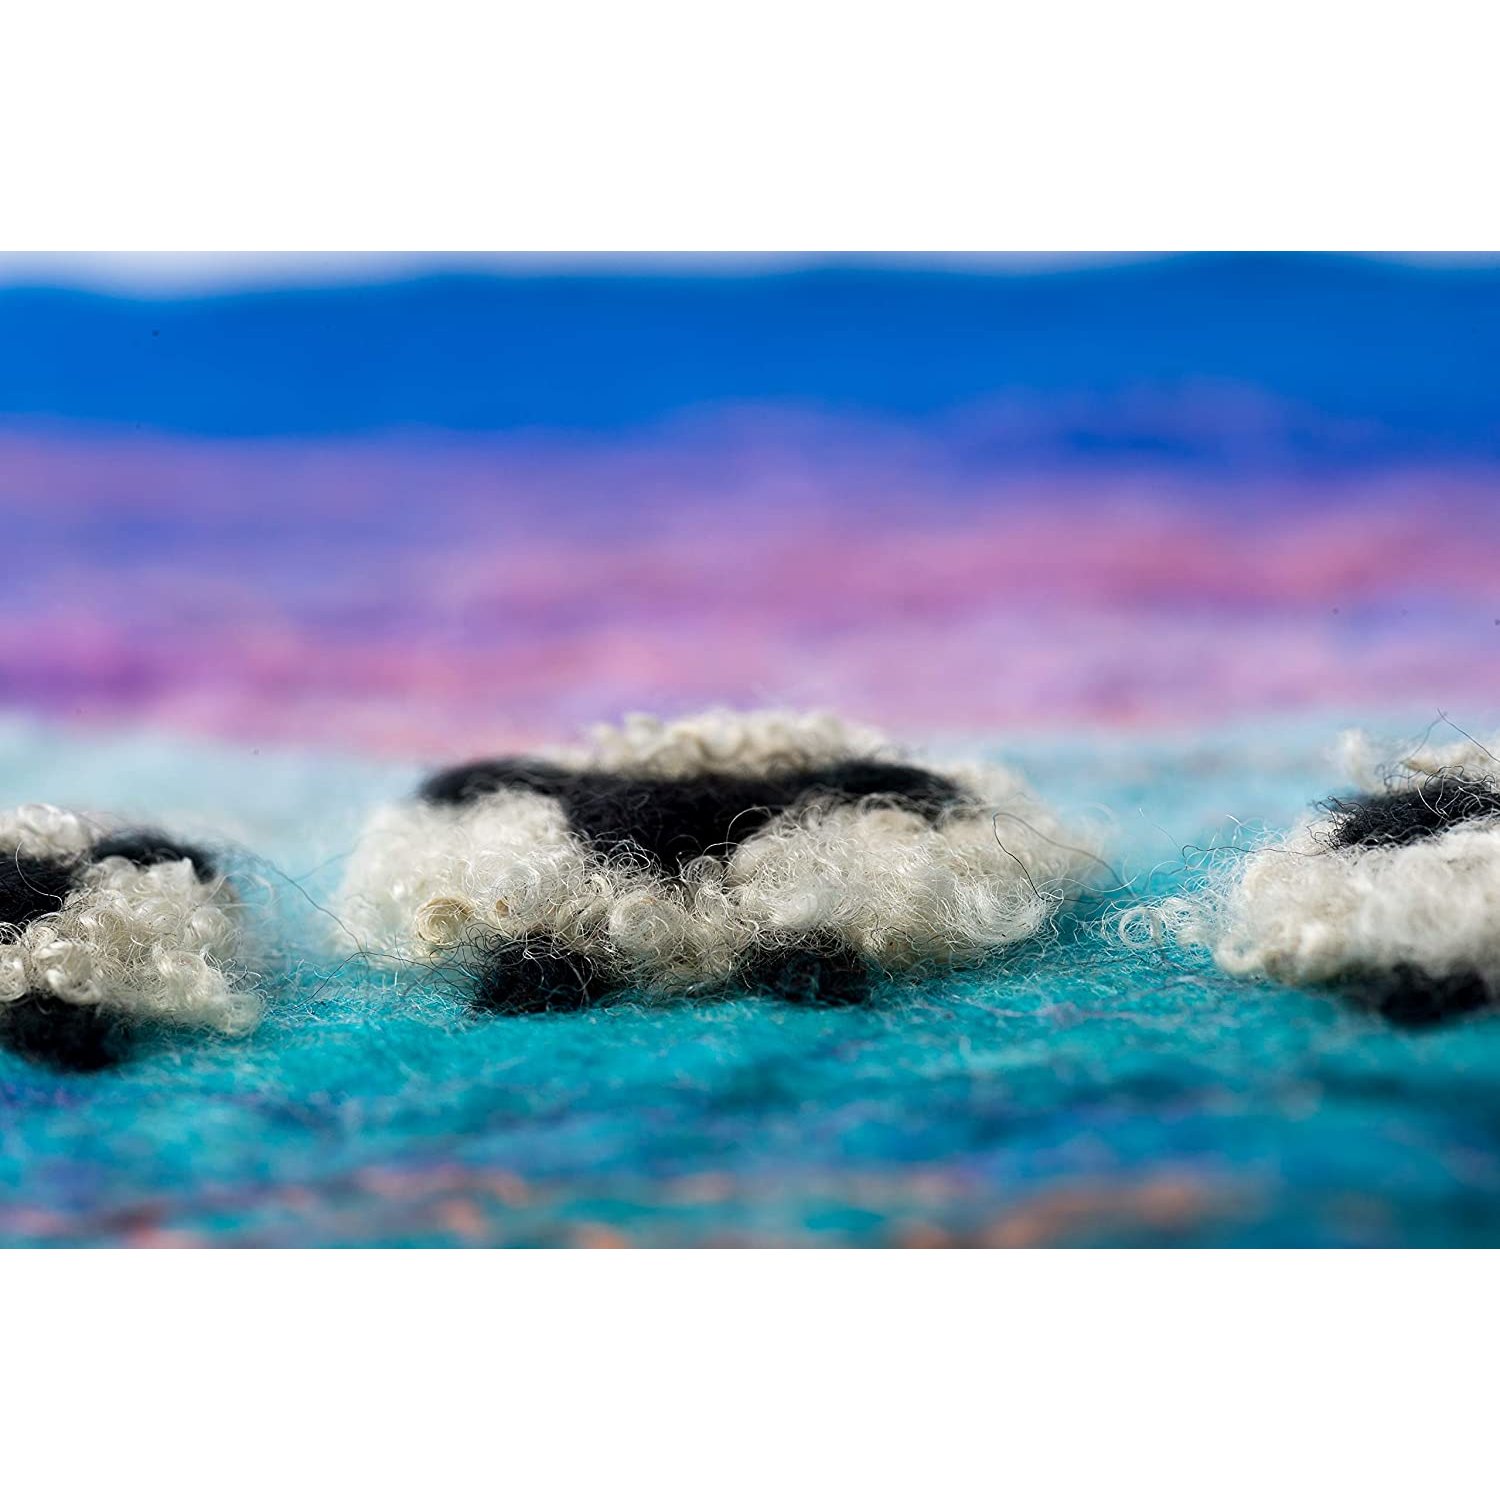 Artfelt winter sheep picture felt kit- a carefully designed felt making kit to make a lovely winter sheep picture with a colourful sunset.